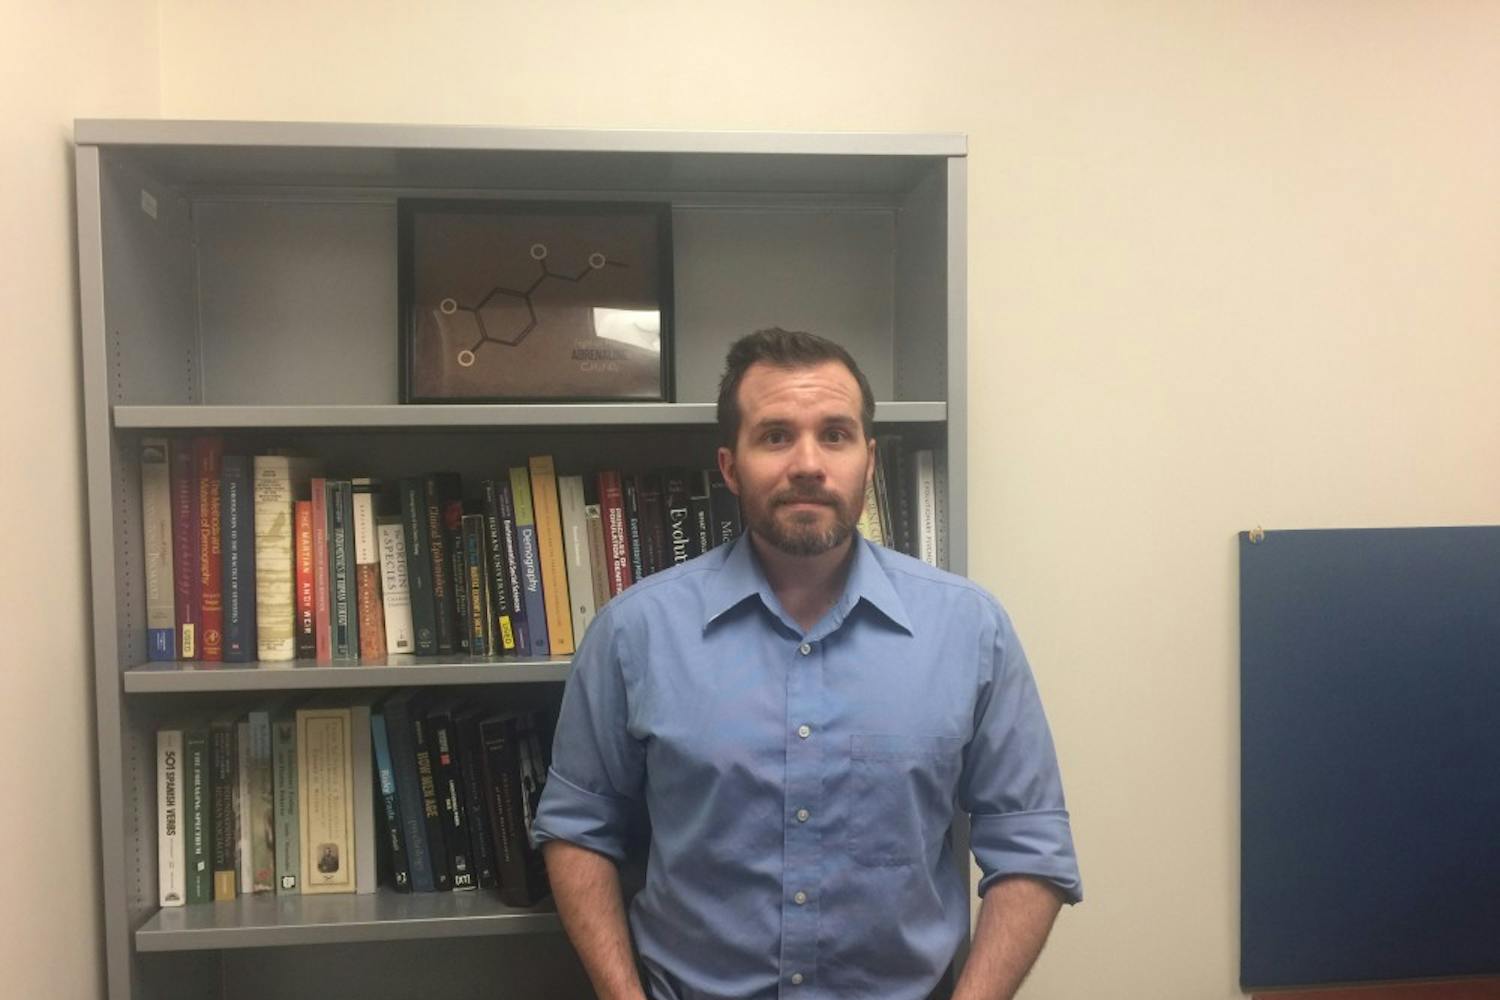 Ben Trumble, assistant professor in the School of Human Evolution and Social Change and affiliated faculty in the Center for Evolution and Medicine, poses for a photo in his office on Mar. 27, 2017.&nbsp;